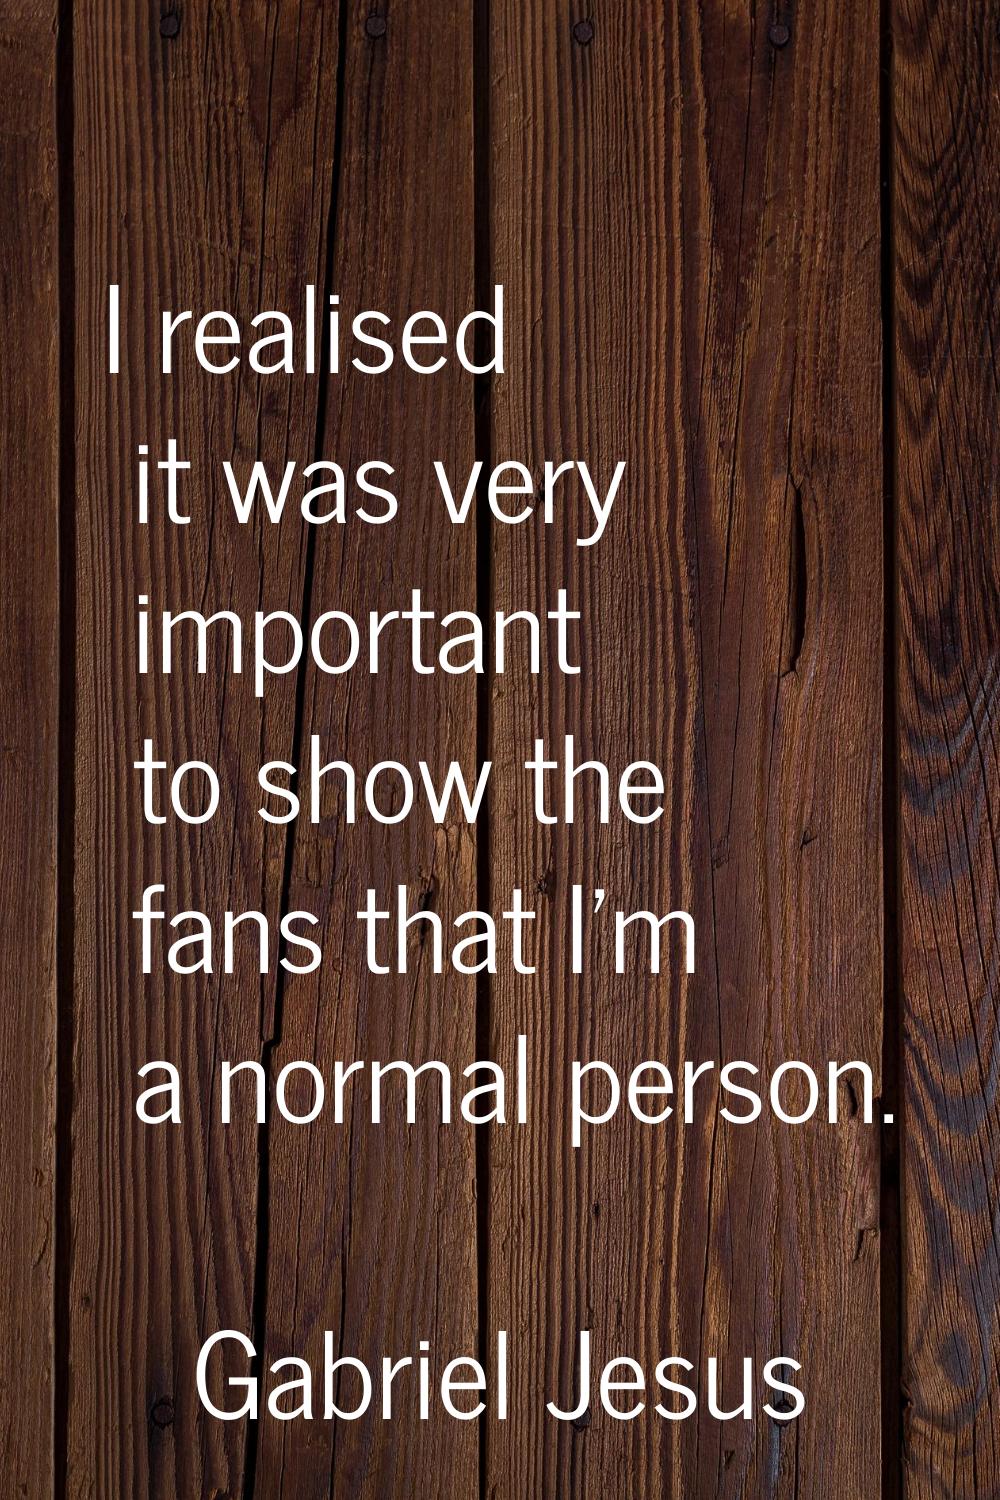 I realised it was very important to show the fans that I'm a normal person.